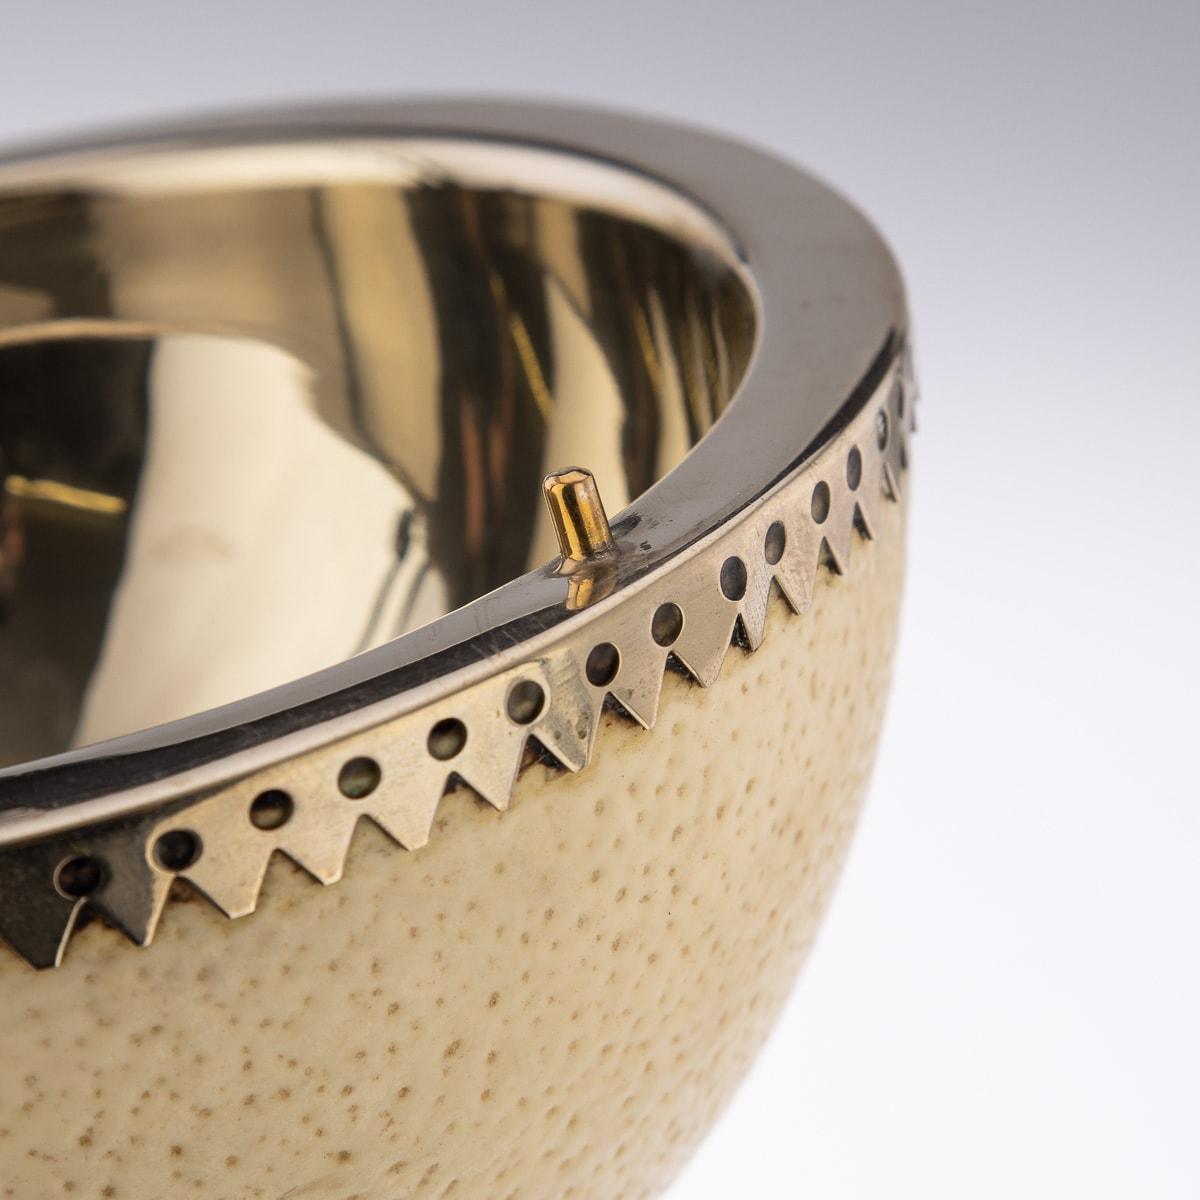 Anthony Redmile Ostrich Egg Box Mounted on Silver Plated Cup, London, c.1970 10